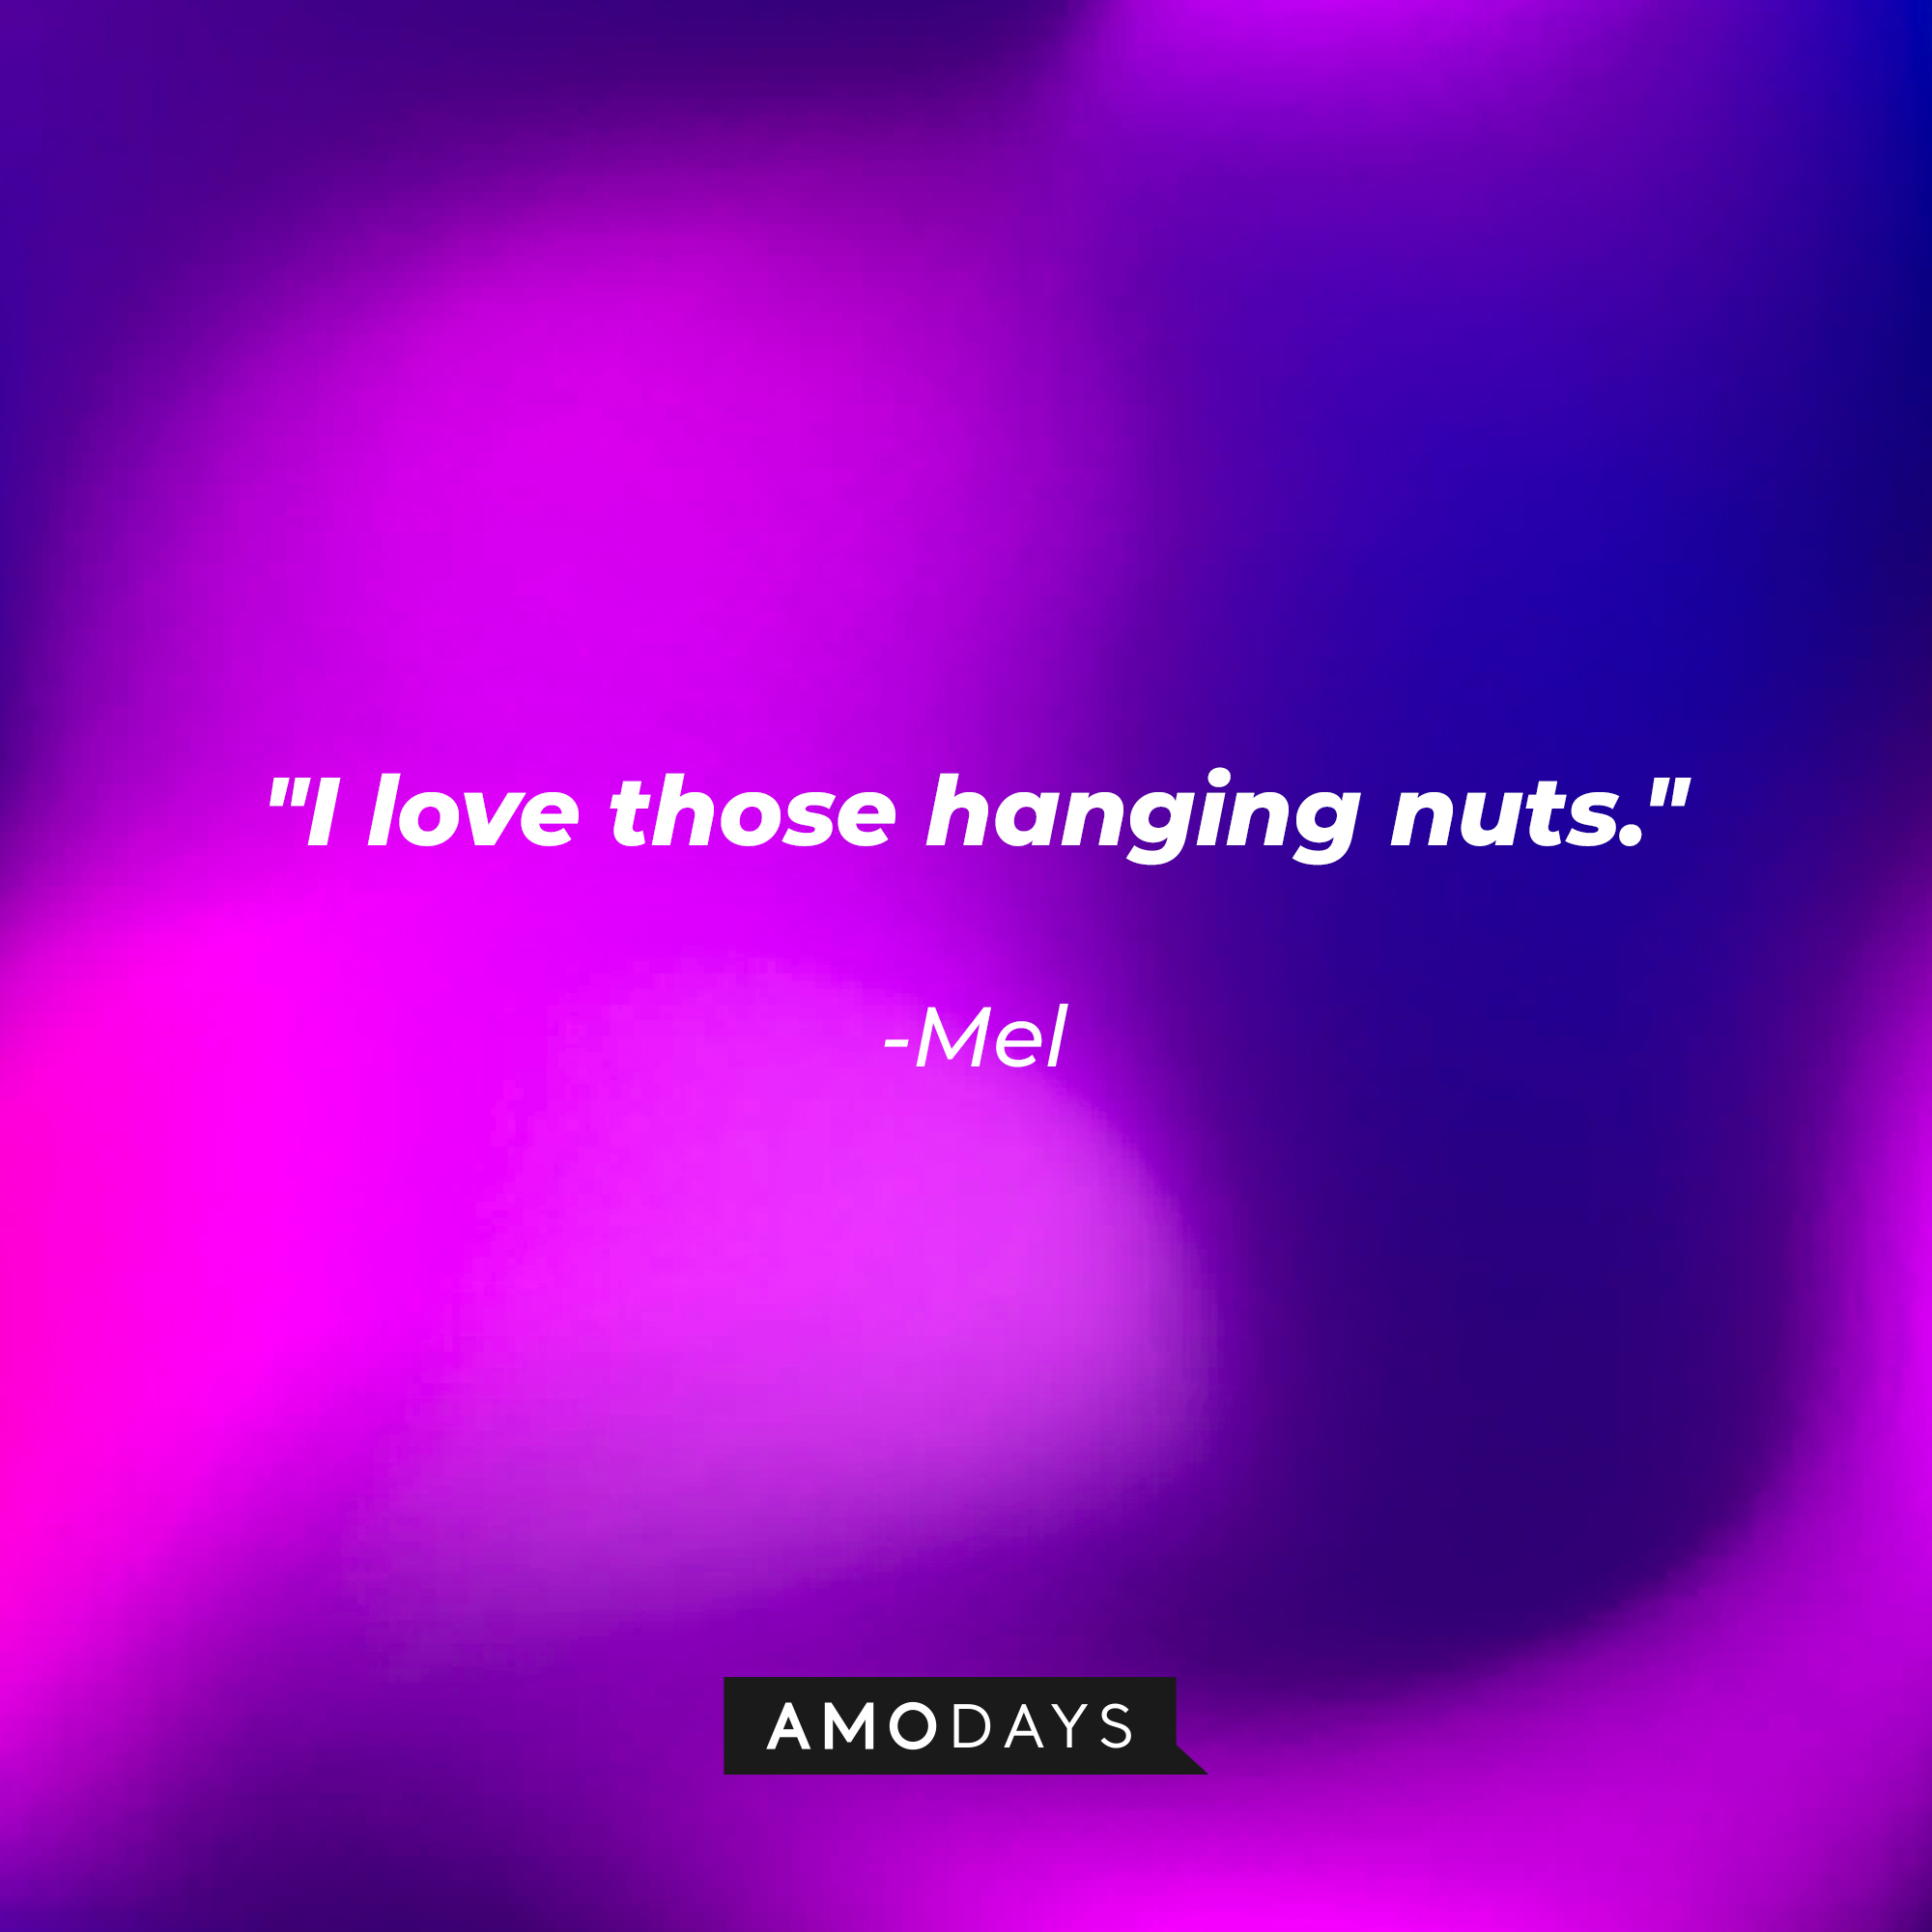 Mel's quote: "I love those hanging nuts." | Image: AmoDays